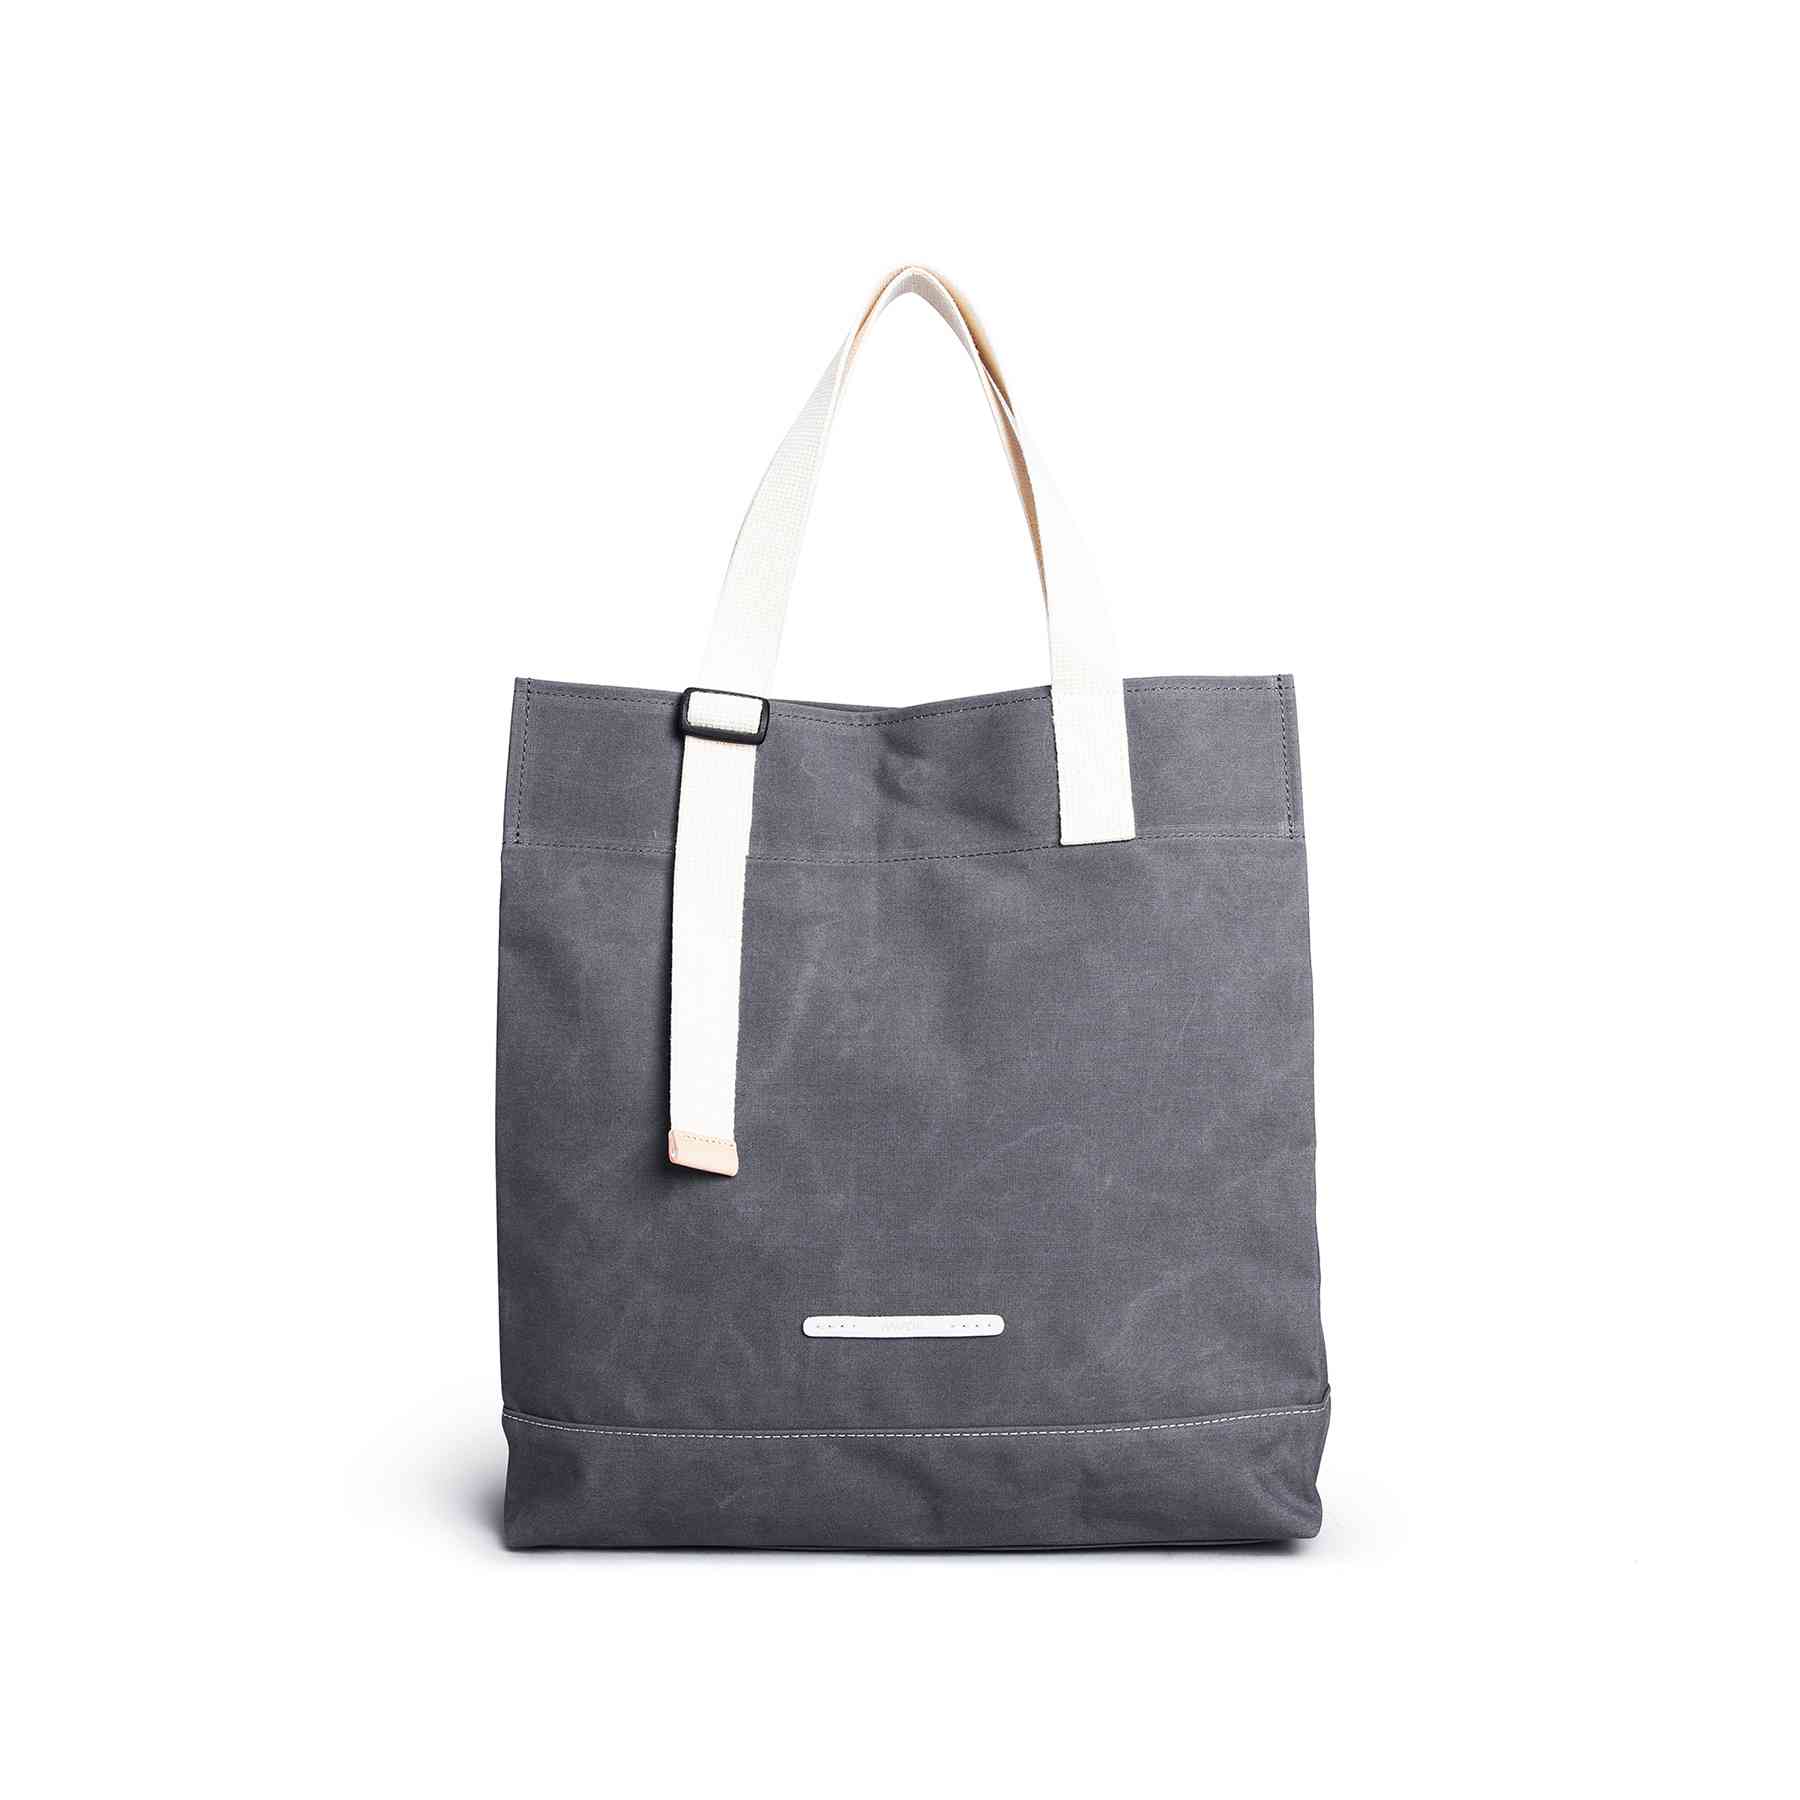 R TOTE 291 RAW WAXED CHARCOAL